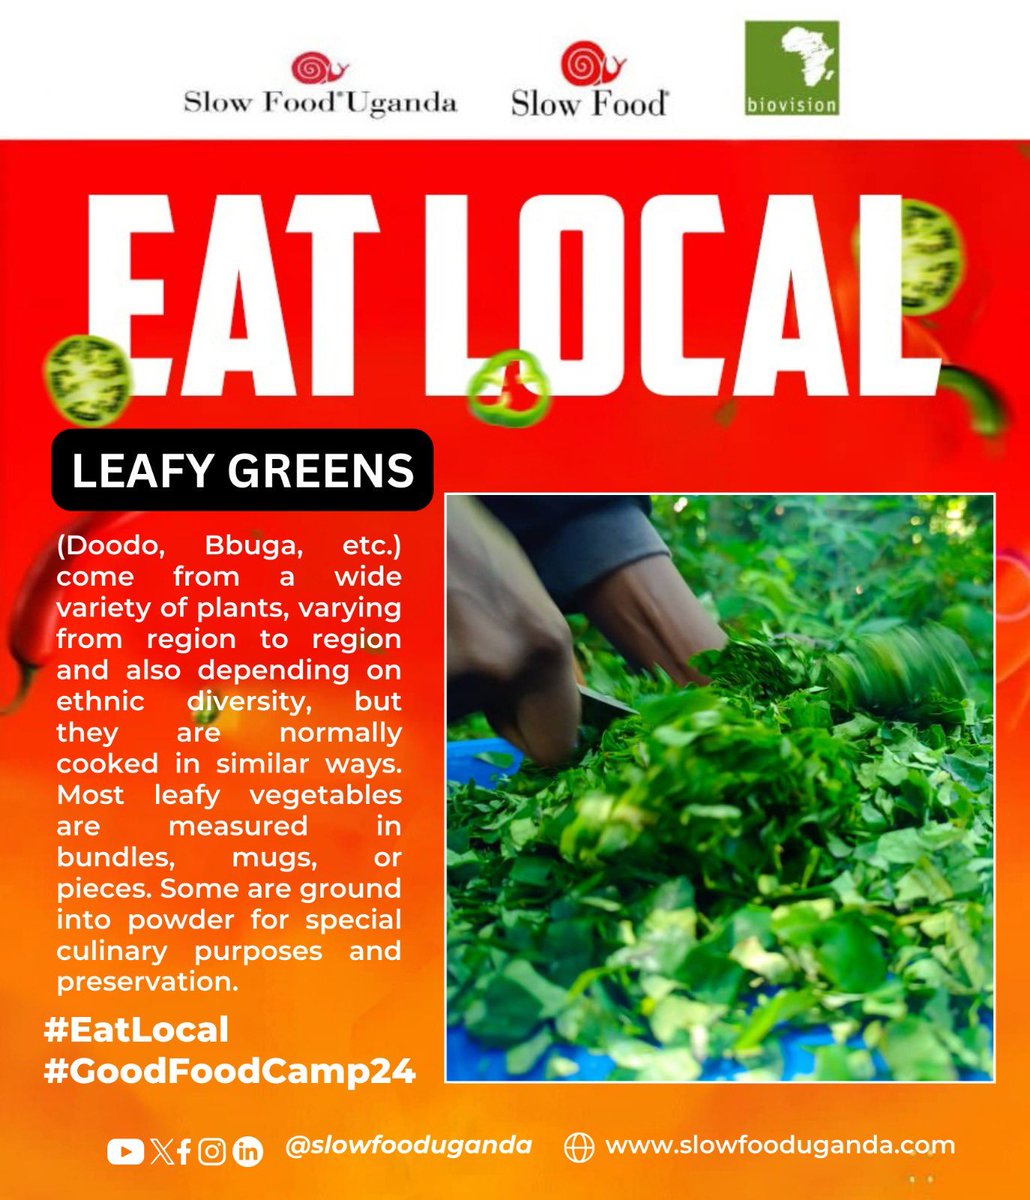 Traditional and indigenous foods hold the key to unlocking essential vitamins and minerals, combatting micronutrient deficiencies in staple foods. Embracing diverse and nutritious local cuisine is the answer to a healthier future. #EatLocal